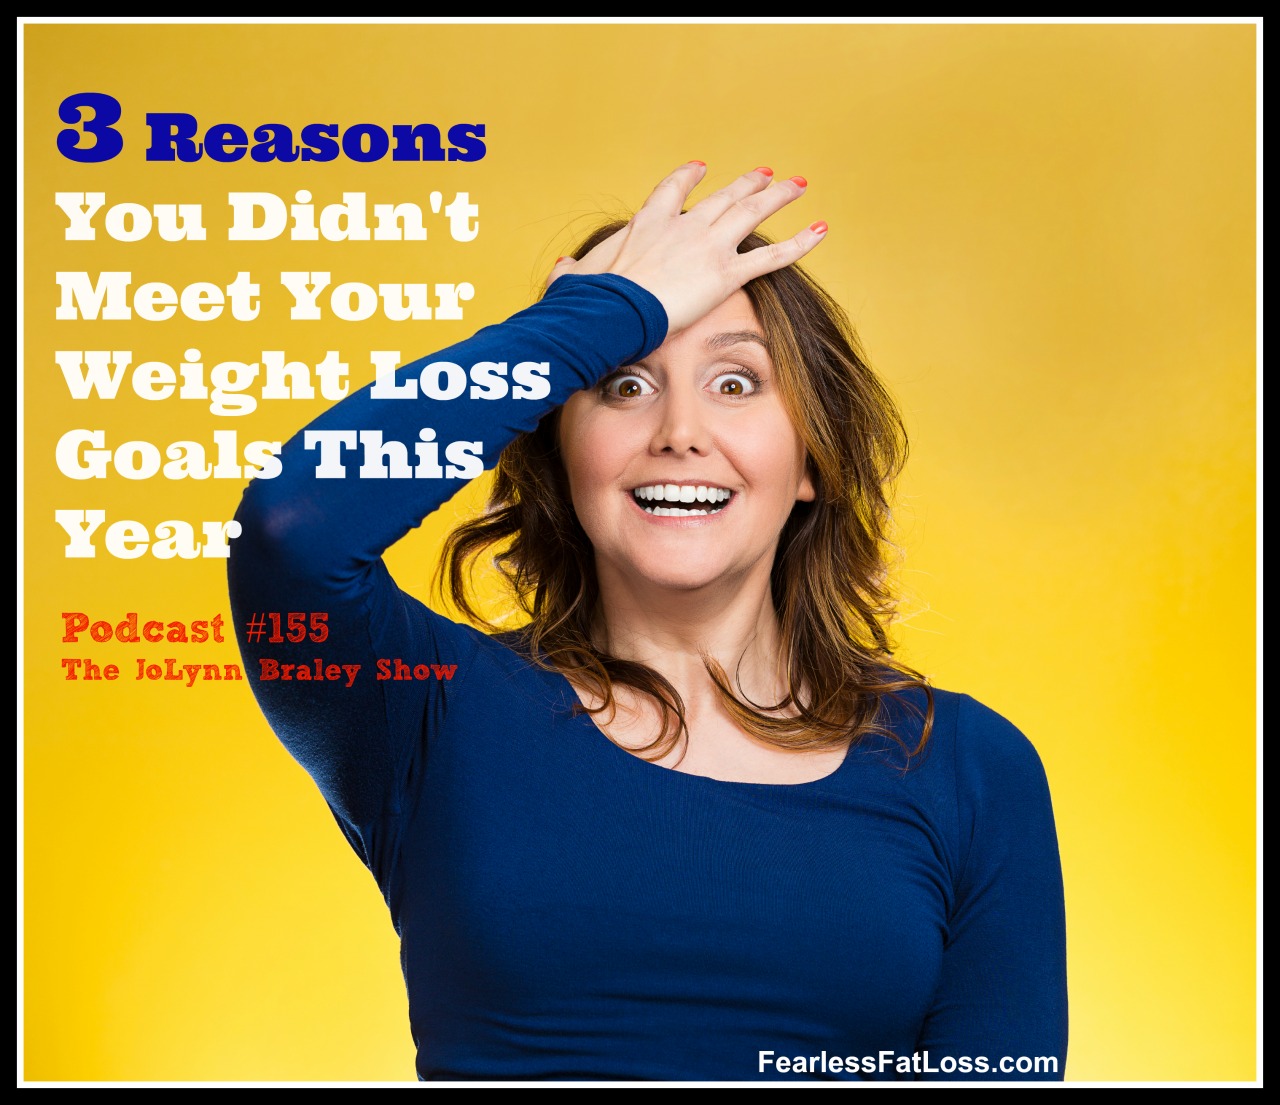 3 Reasons You Didn’t Meet Your Weight Loss Goals This Year [Podcast #155]